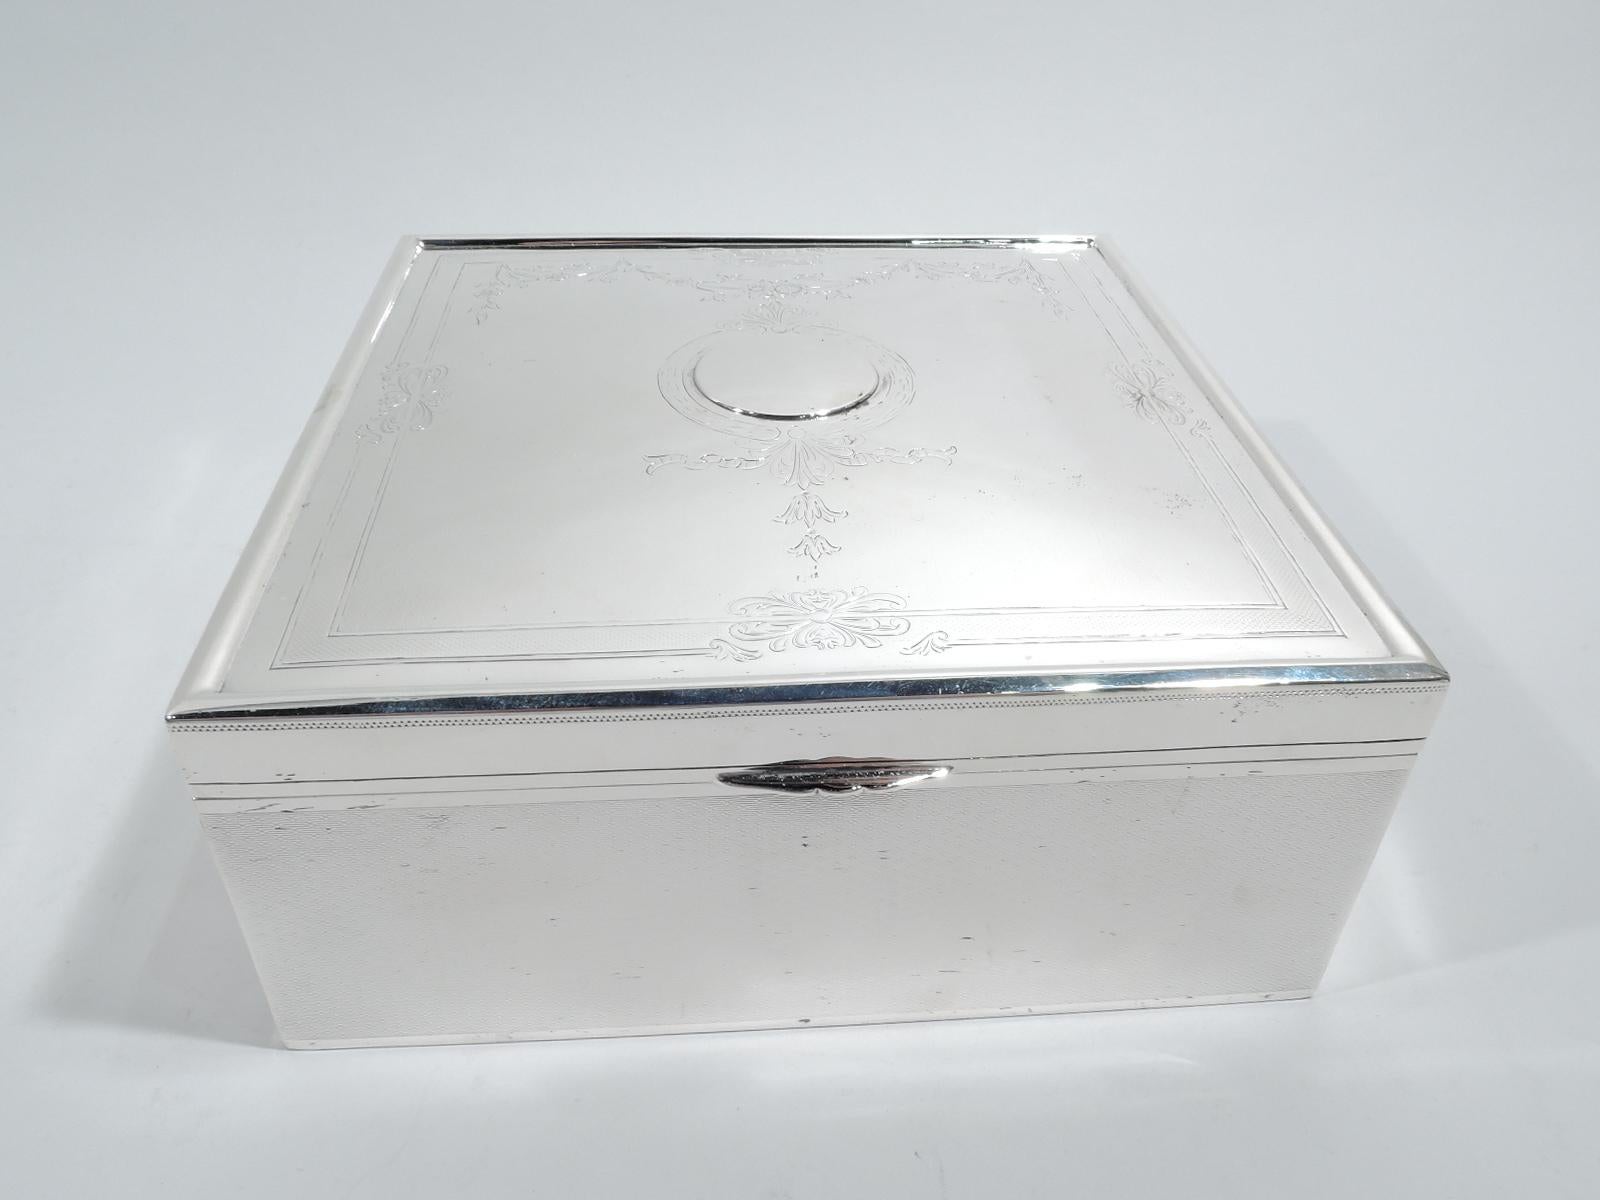 Edwardian Regency sterling silver box. Made by Gorham in Providence in 1917. Square with straight sides. Cover hinged with gently curved top and scrolled top. Allover engine-turned wave ornament on box sides and cover top, which also has engraved